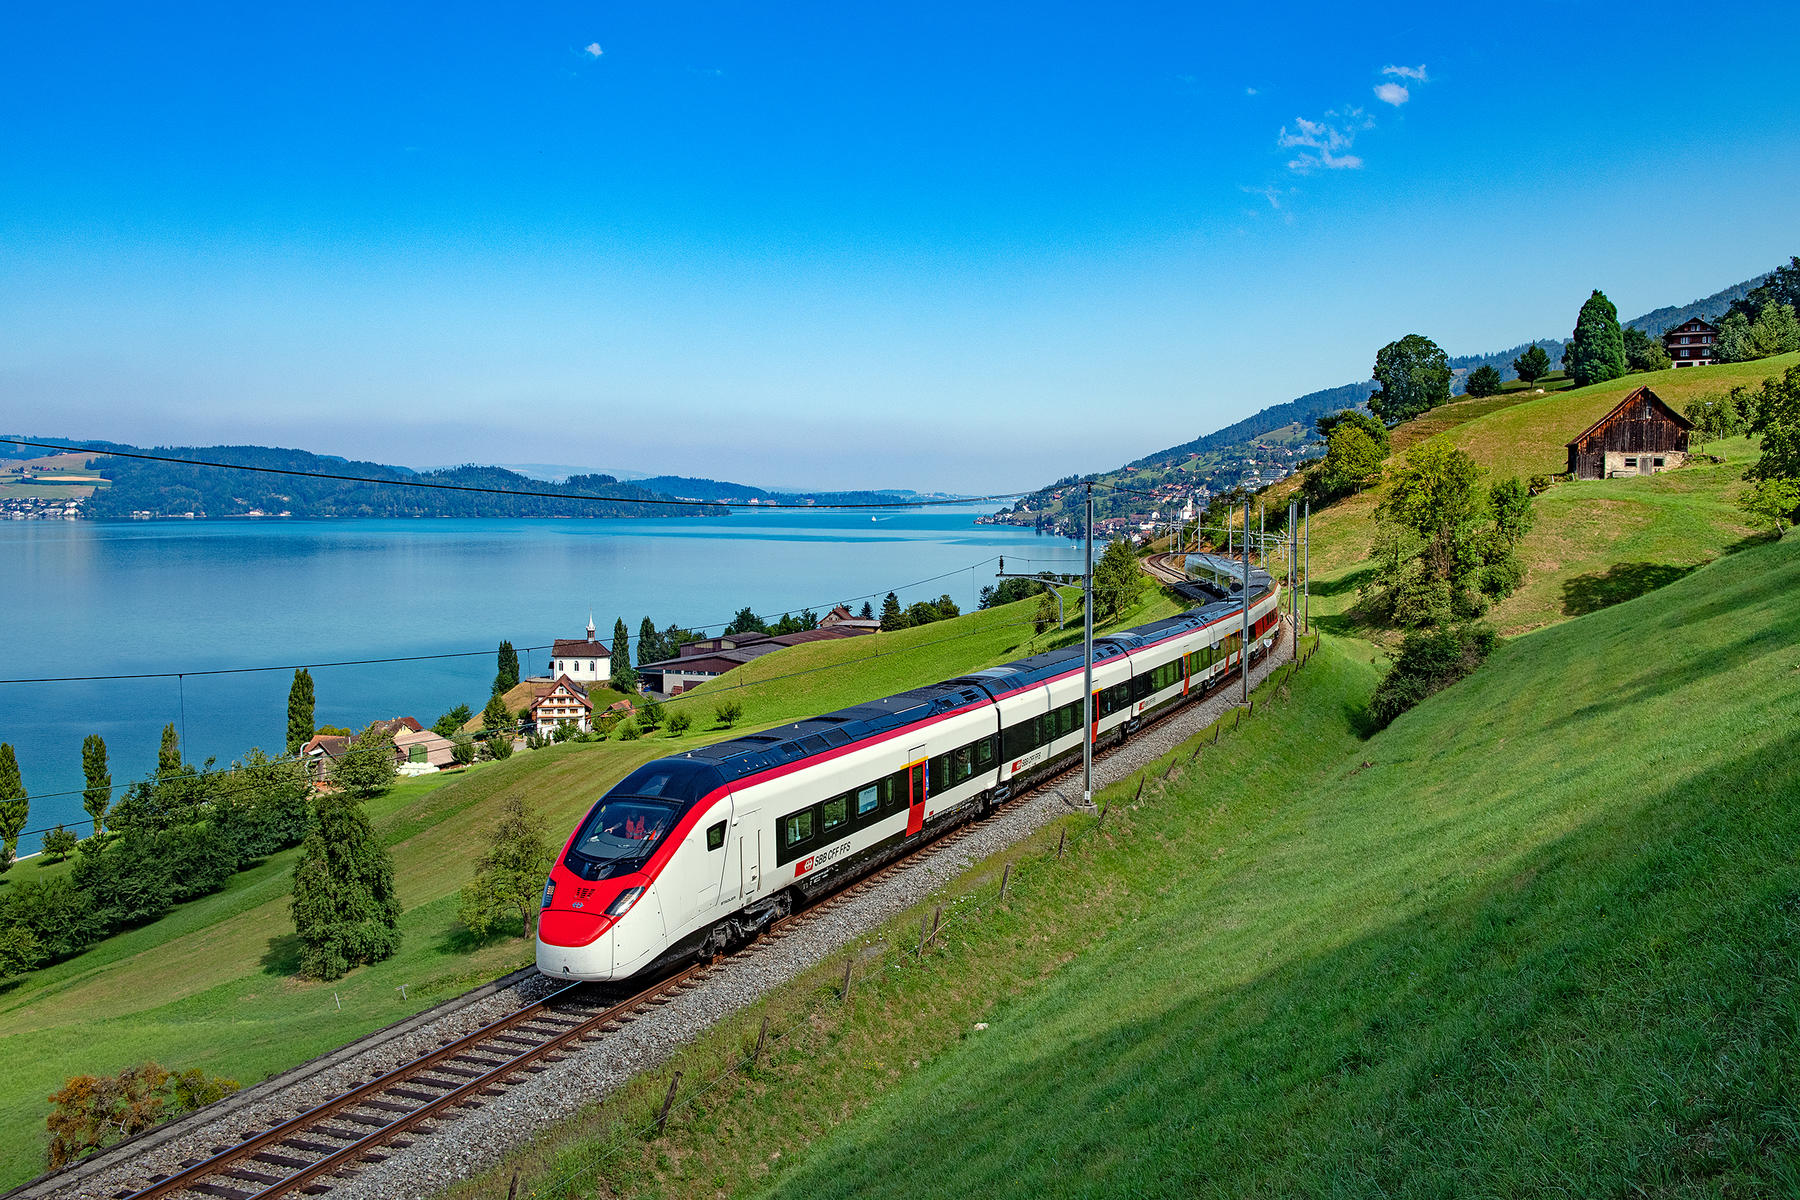 The Swiss Federal Office of Transport Grants Operating Licence for the Stadler Giruno high-speed EMU